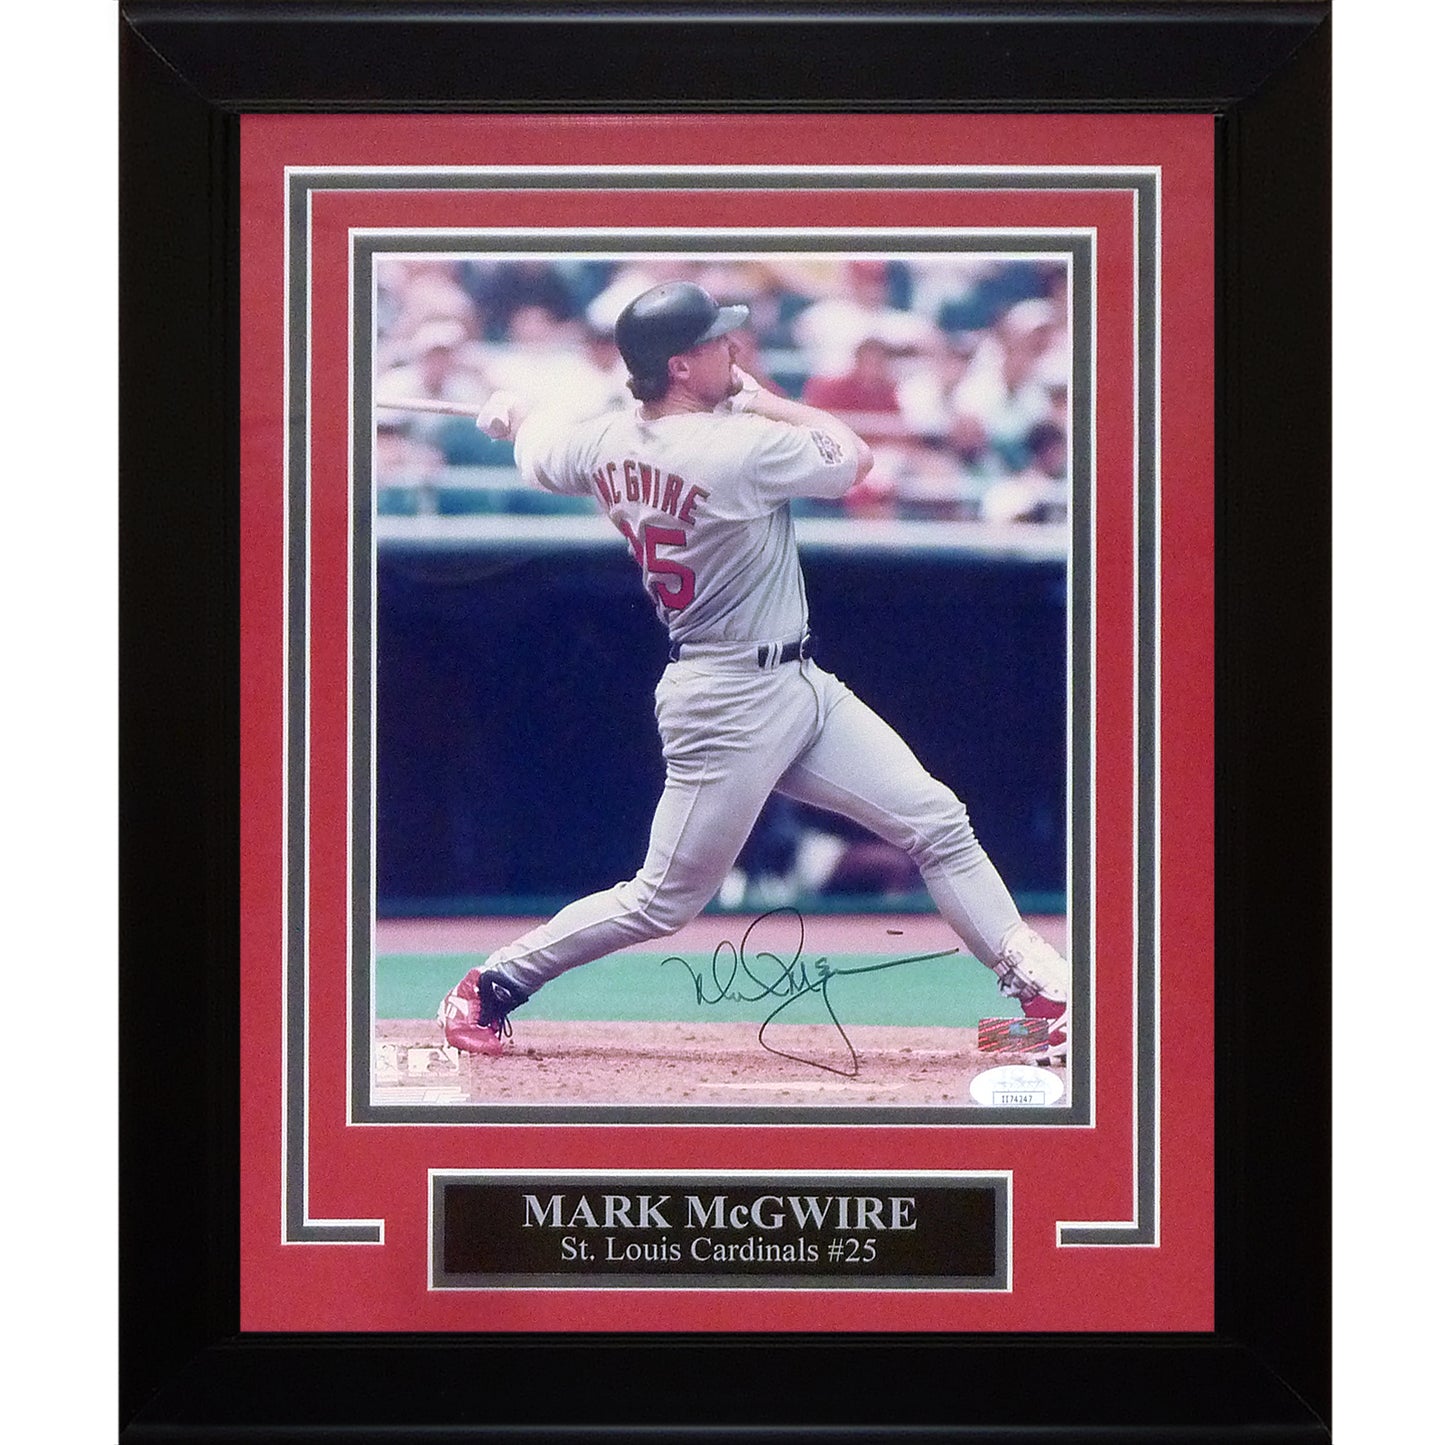 Mark McGwire Autographed St. Louis Cardinals Deluxe Framed 8x10 Photo - JSA